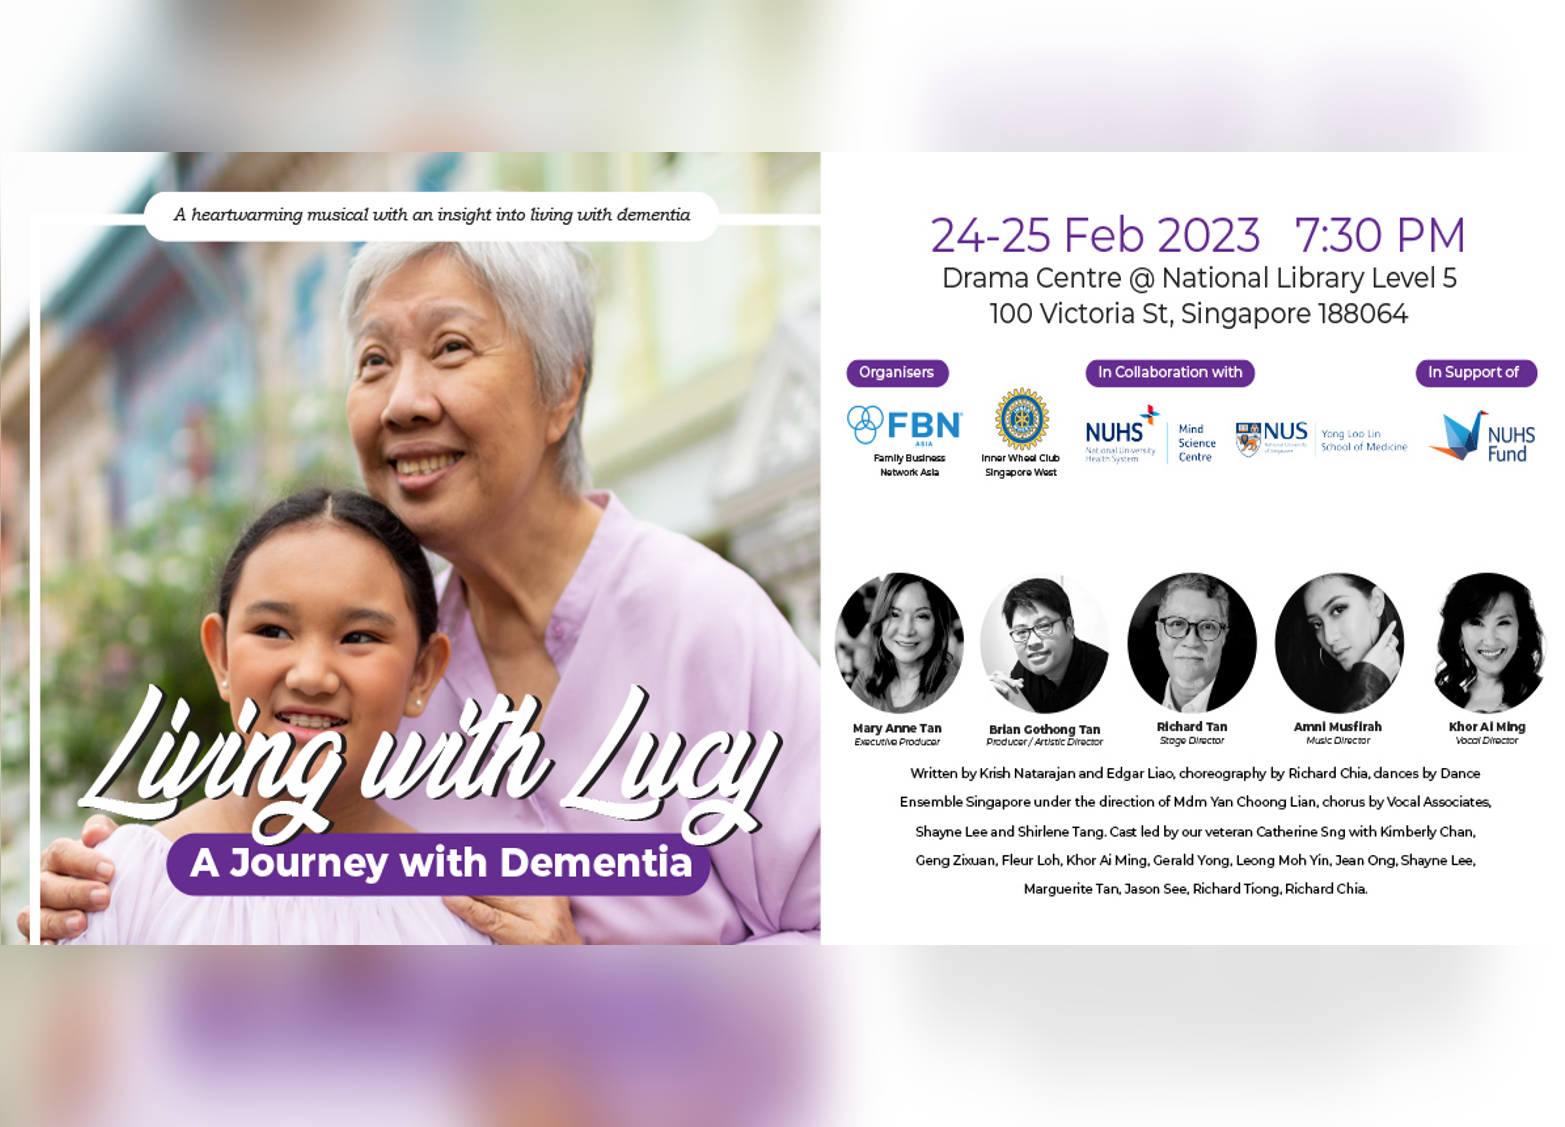 LIVING WITH LUCY - A Journey with Dementia [G]